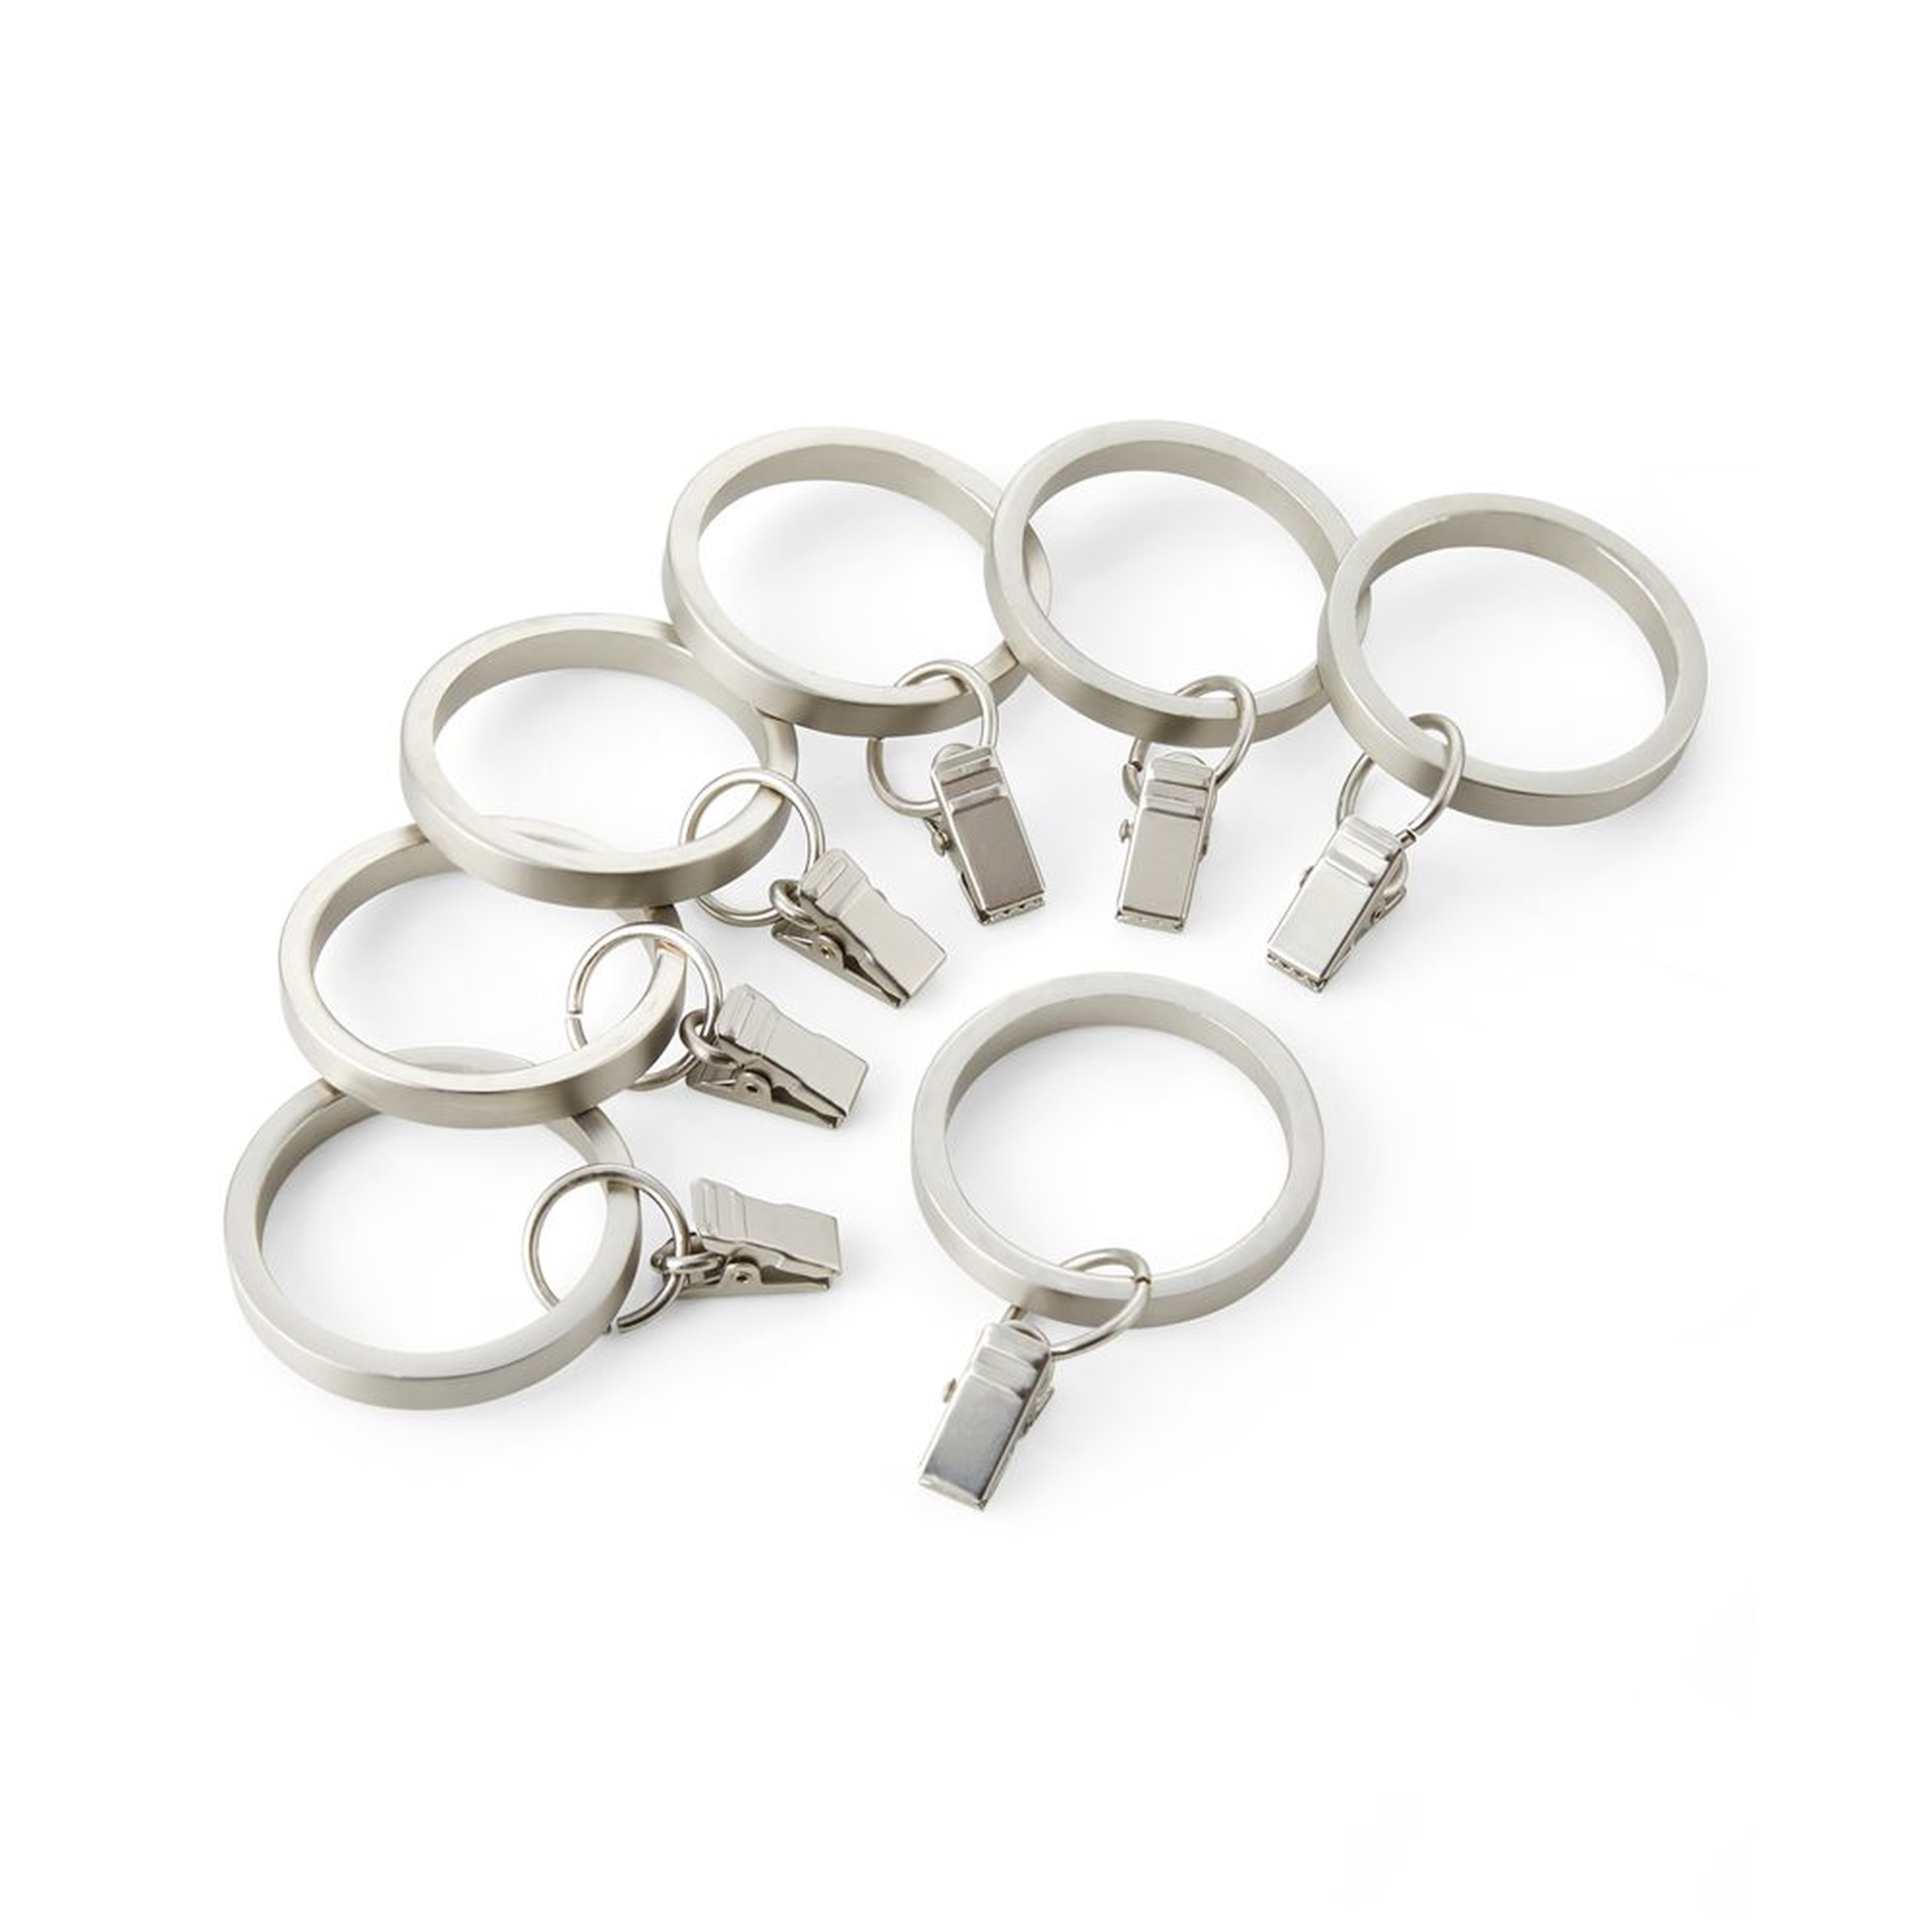 Brushed Nickel Curtain Rings, Set of 7 - Crate and Barrel